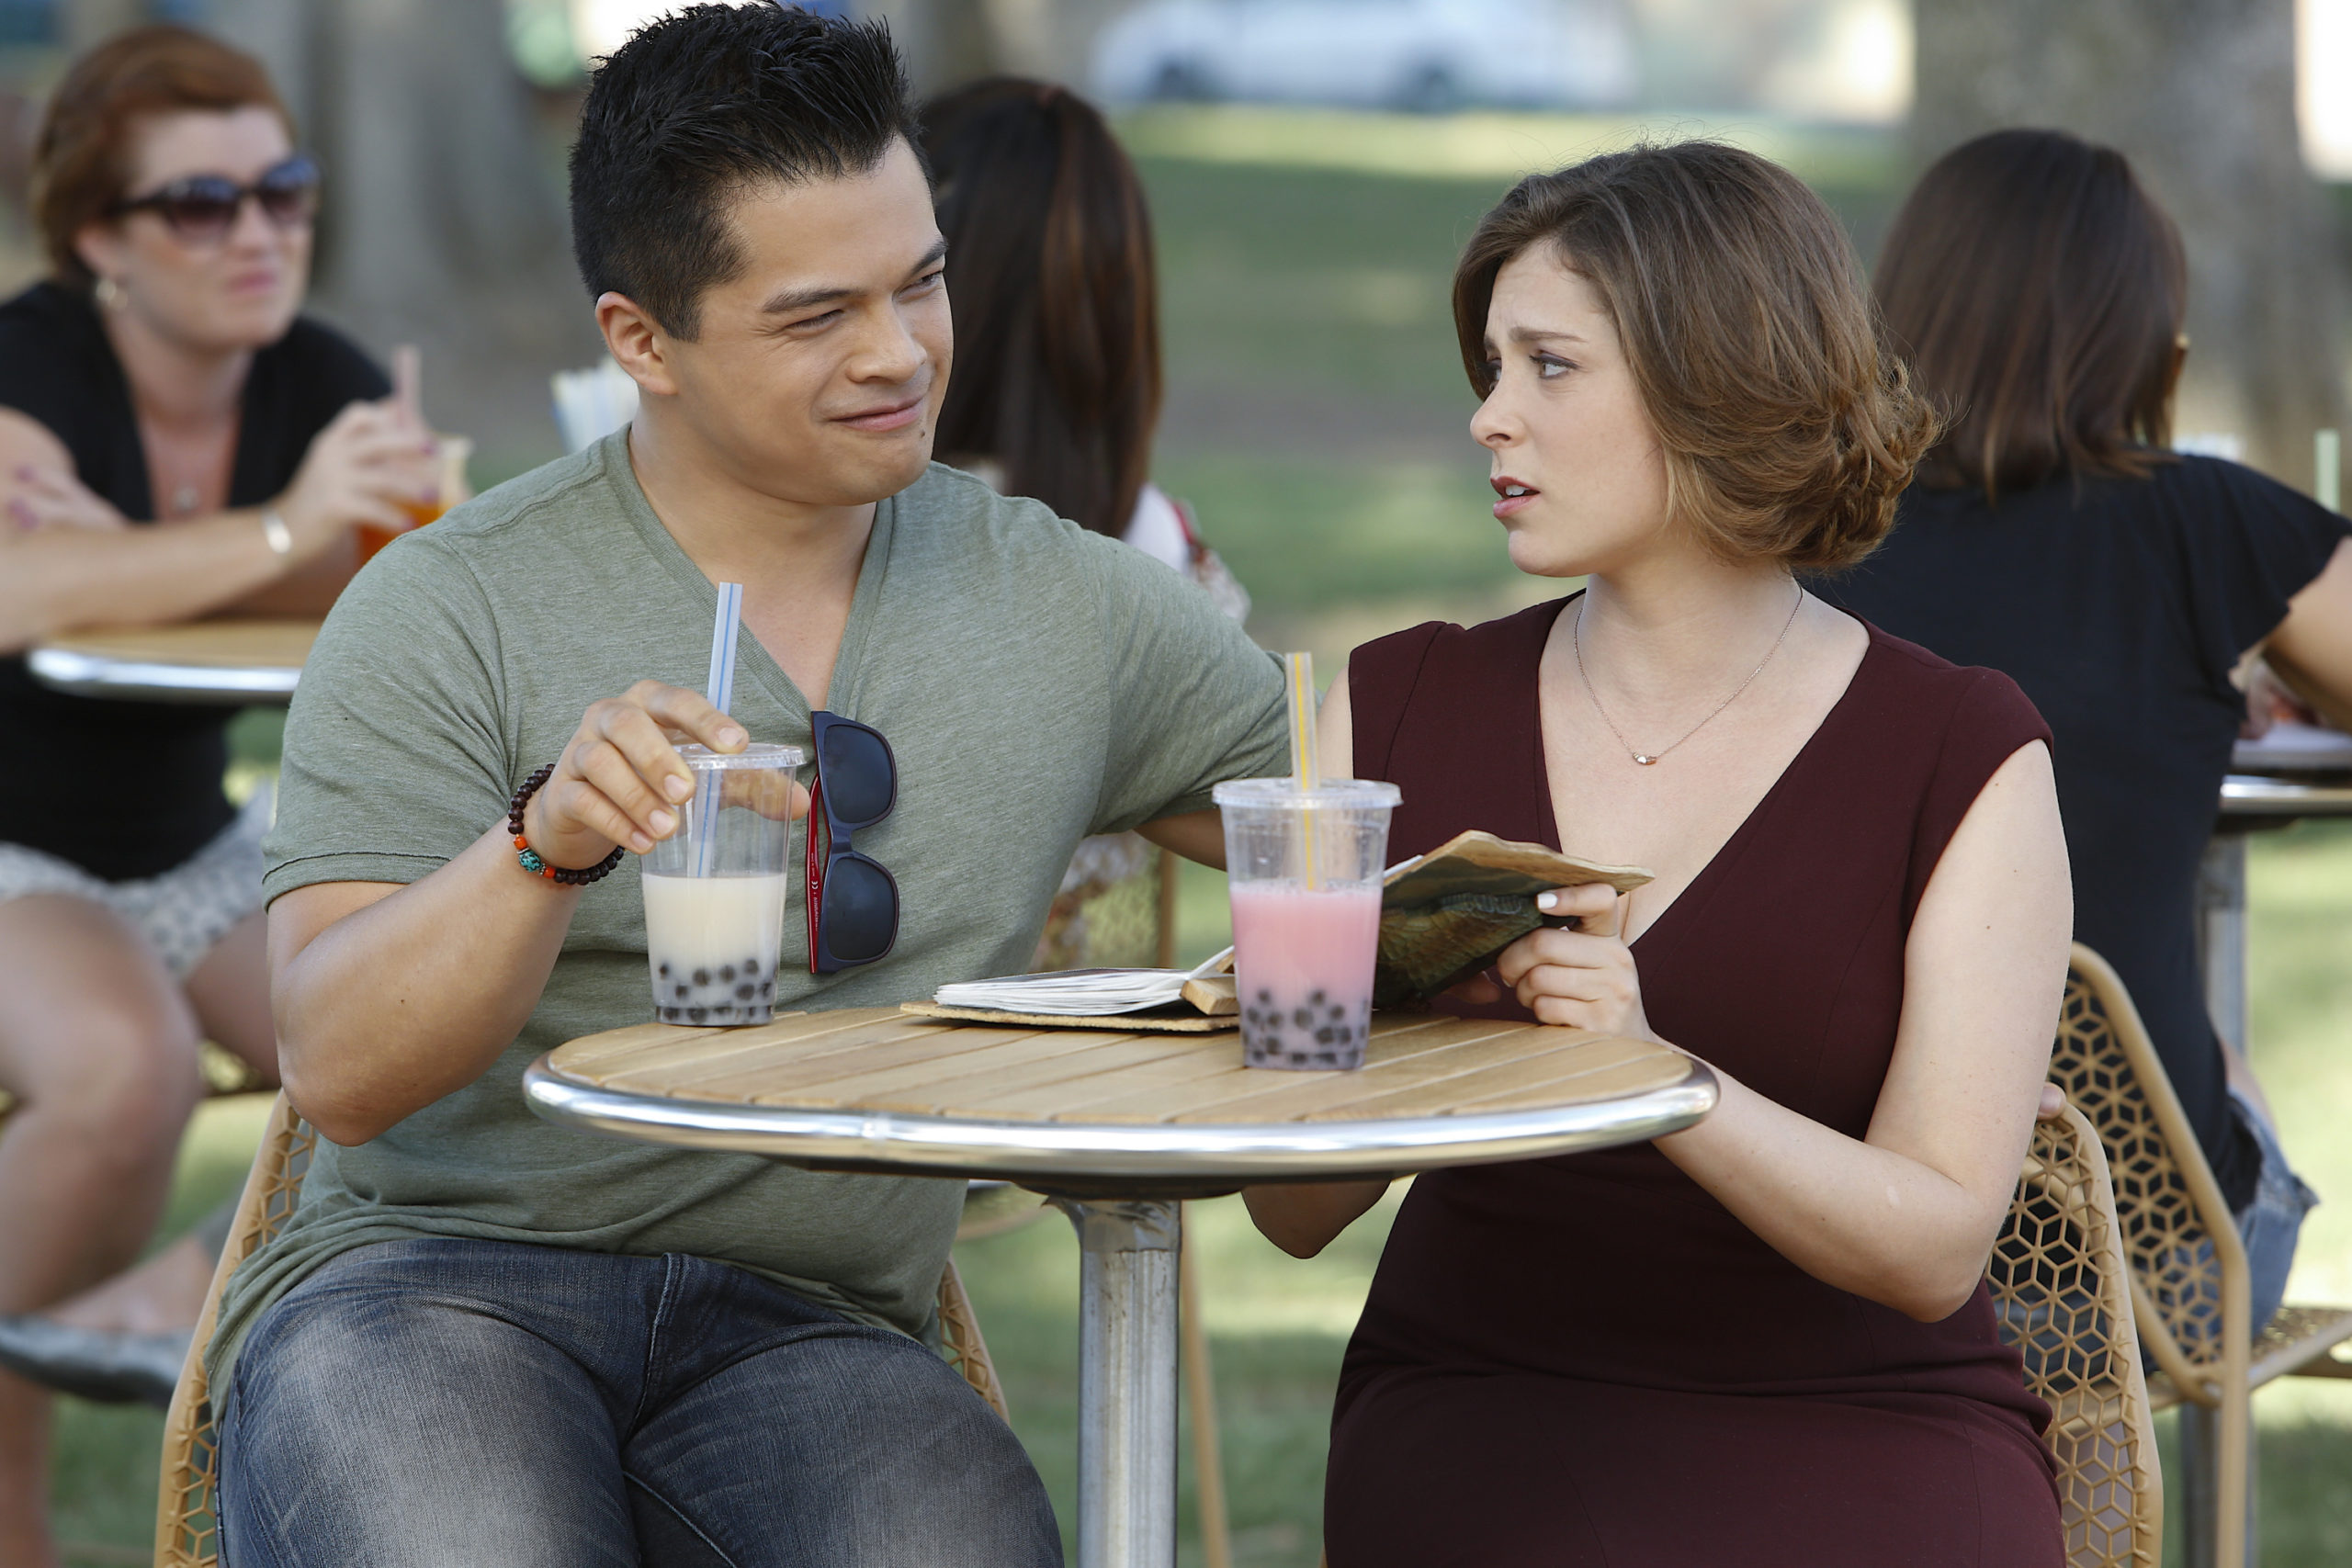 Crazy Ex-Girlfriend - Vincent Rodriguez III as Josh and Rachel Bloom as Rebecca - 'Josh and I Are Good People!'